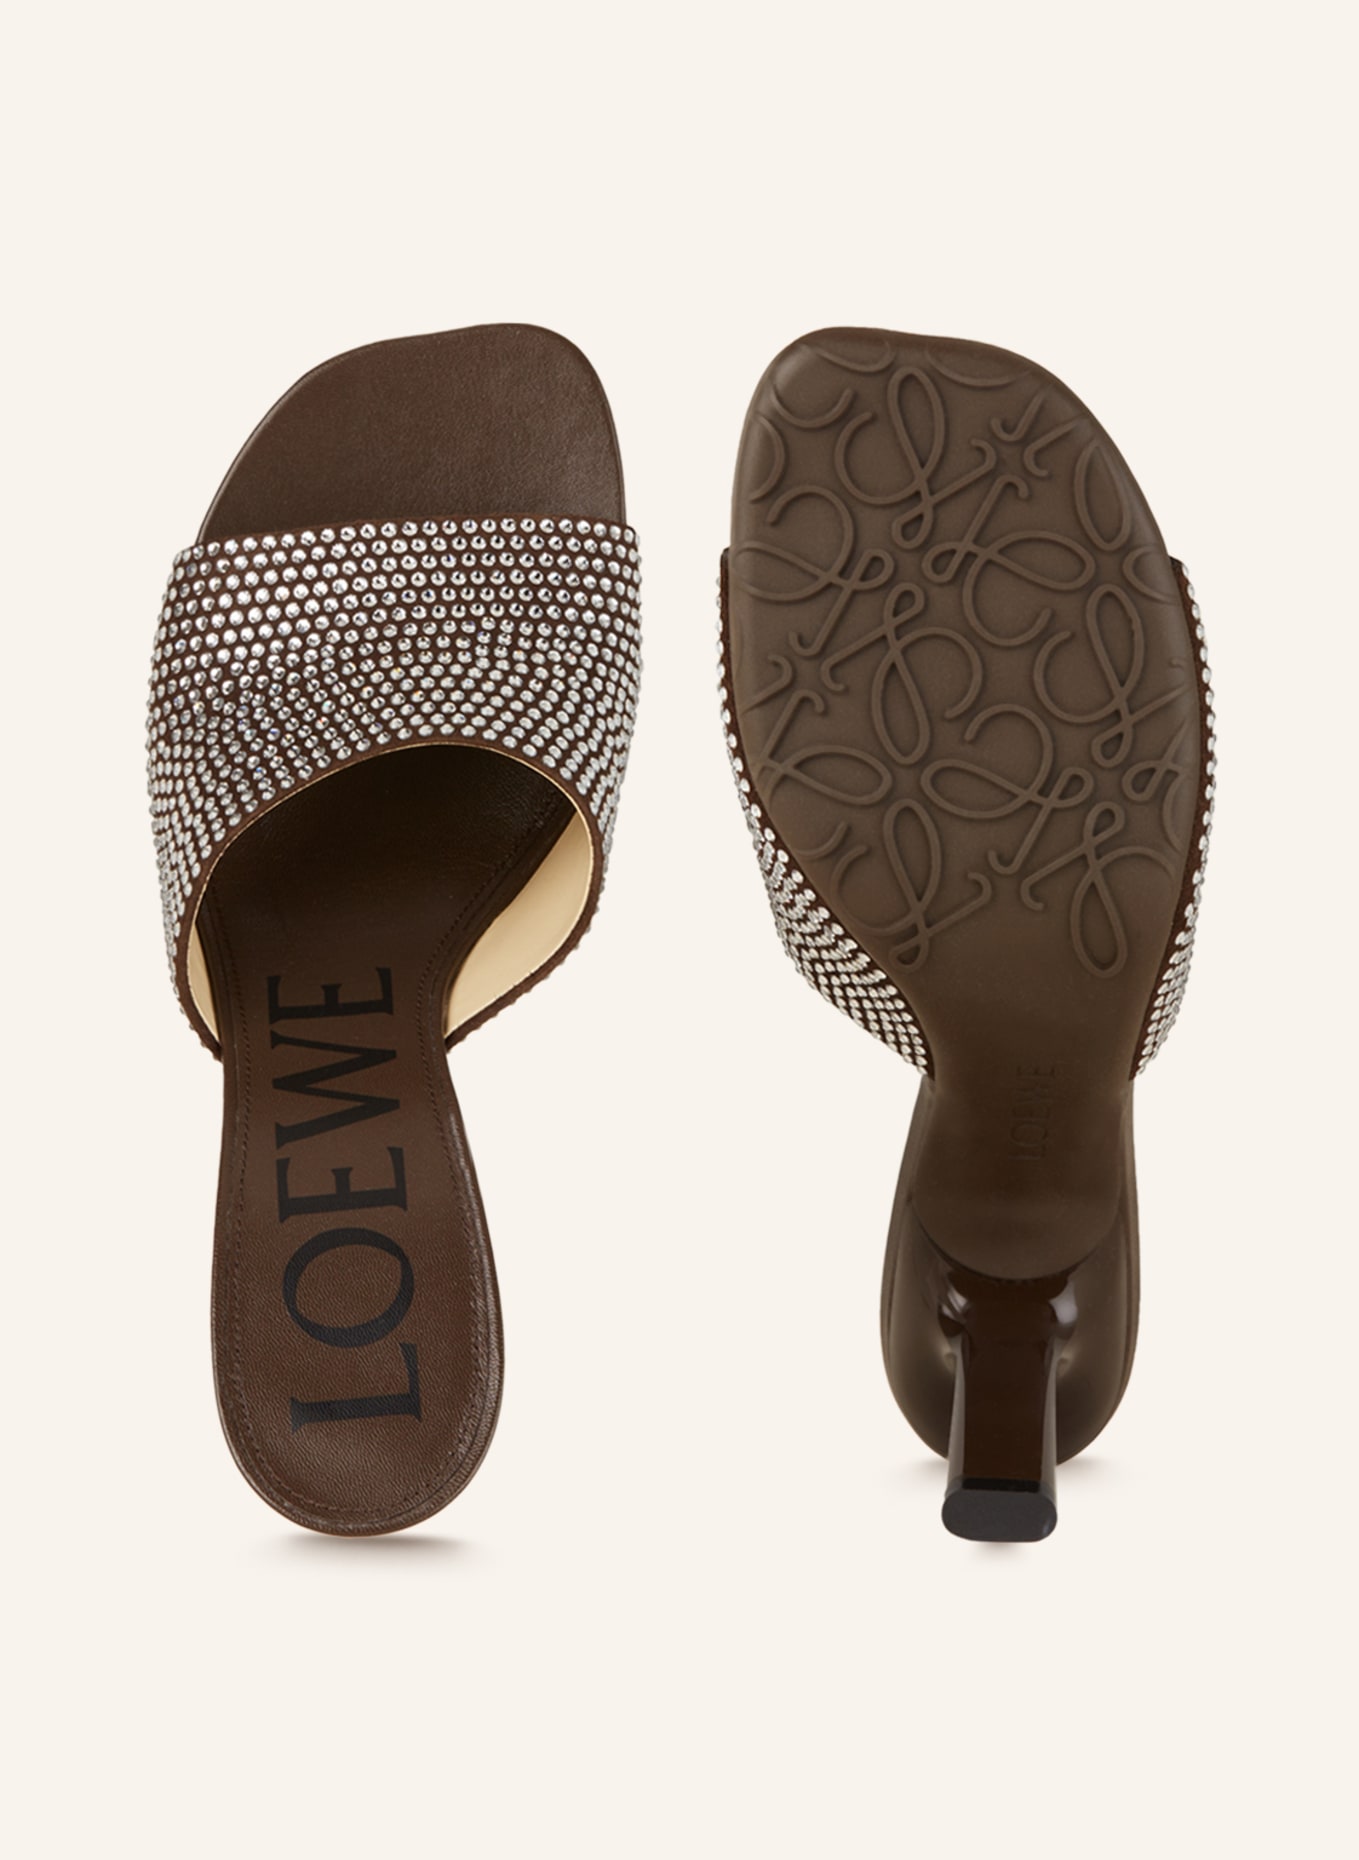 LOEWE Mules with decorative gems, Color: BROWN (Image 5)